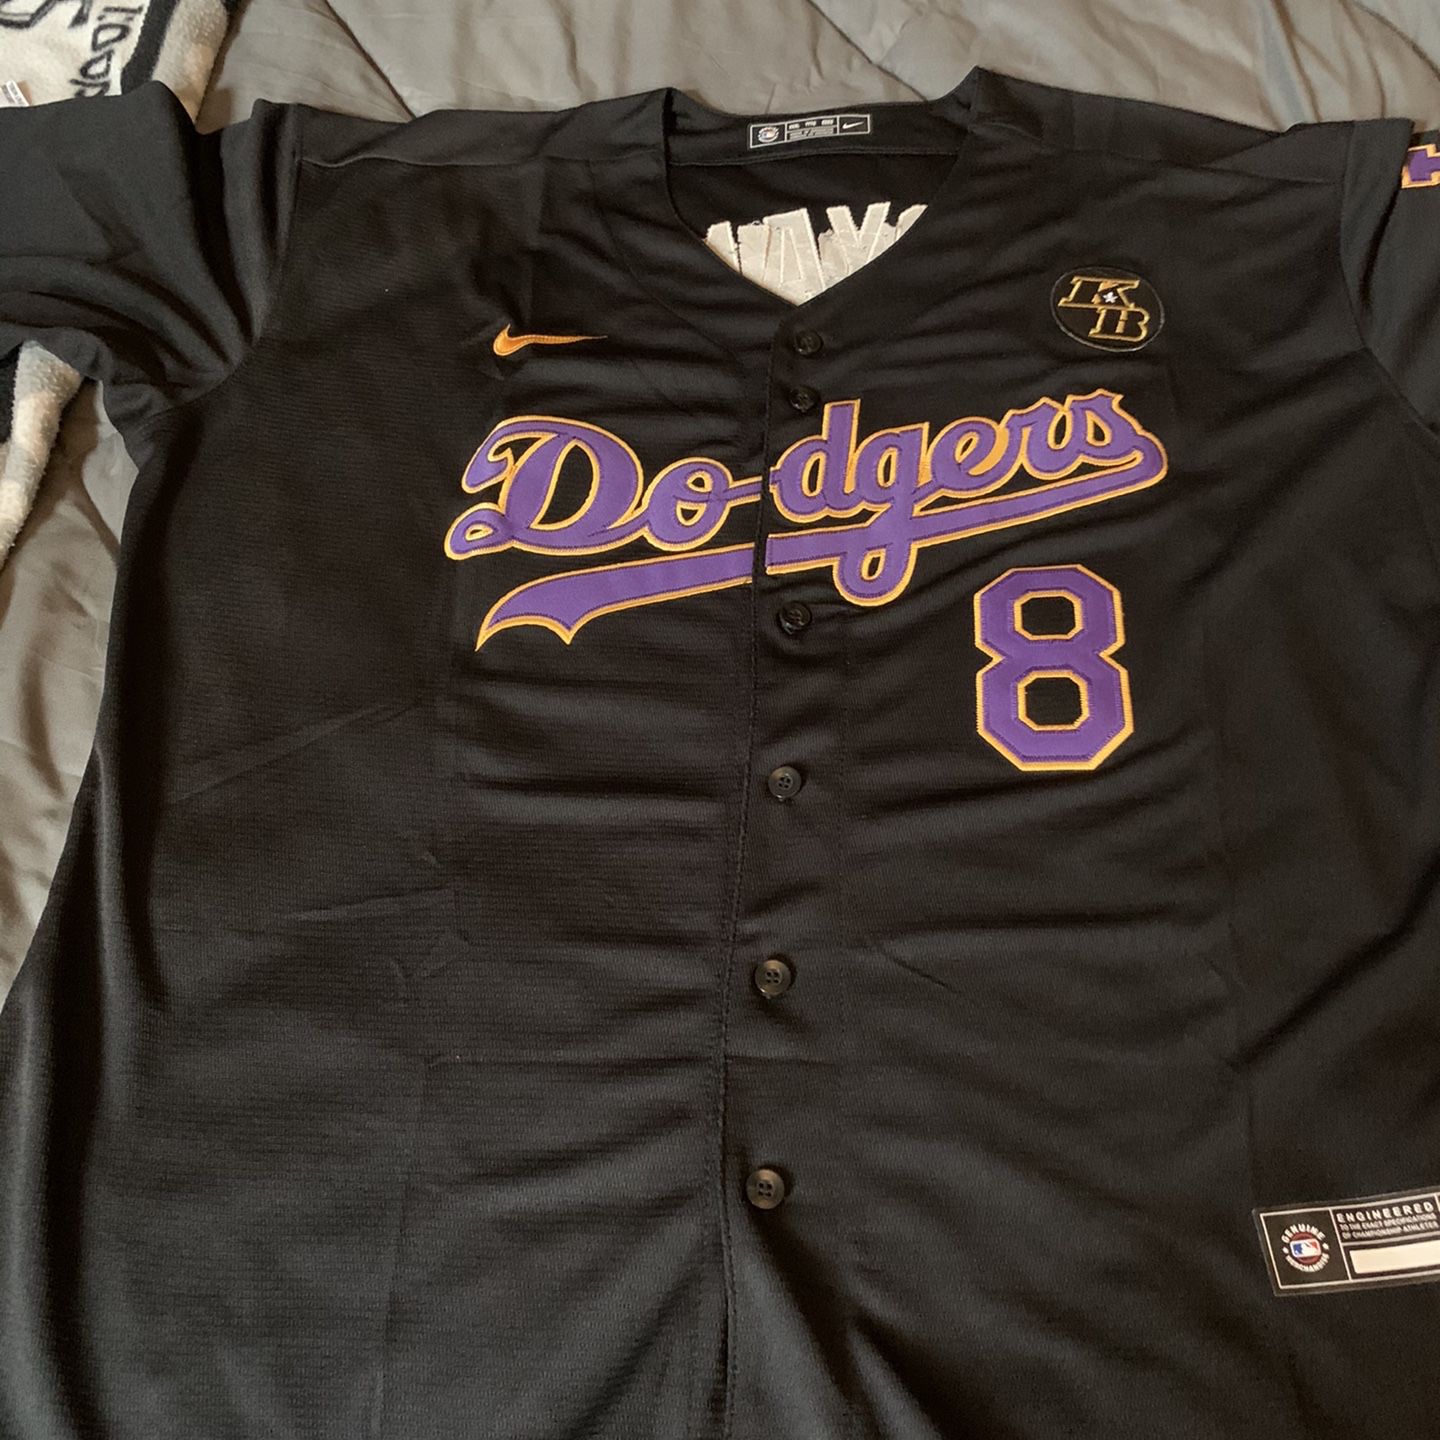 Dodgers Baseball Jersey In LA Lakers Colors A Tribute To Kobe for